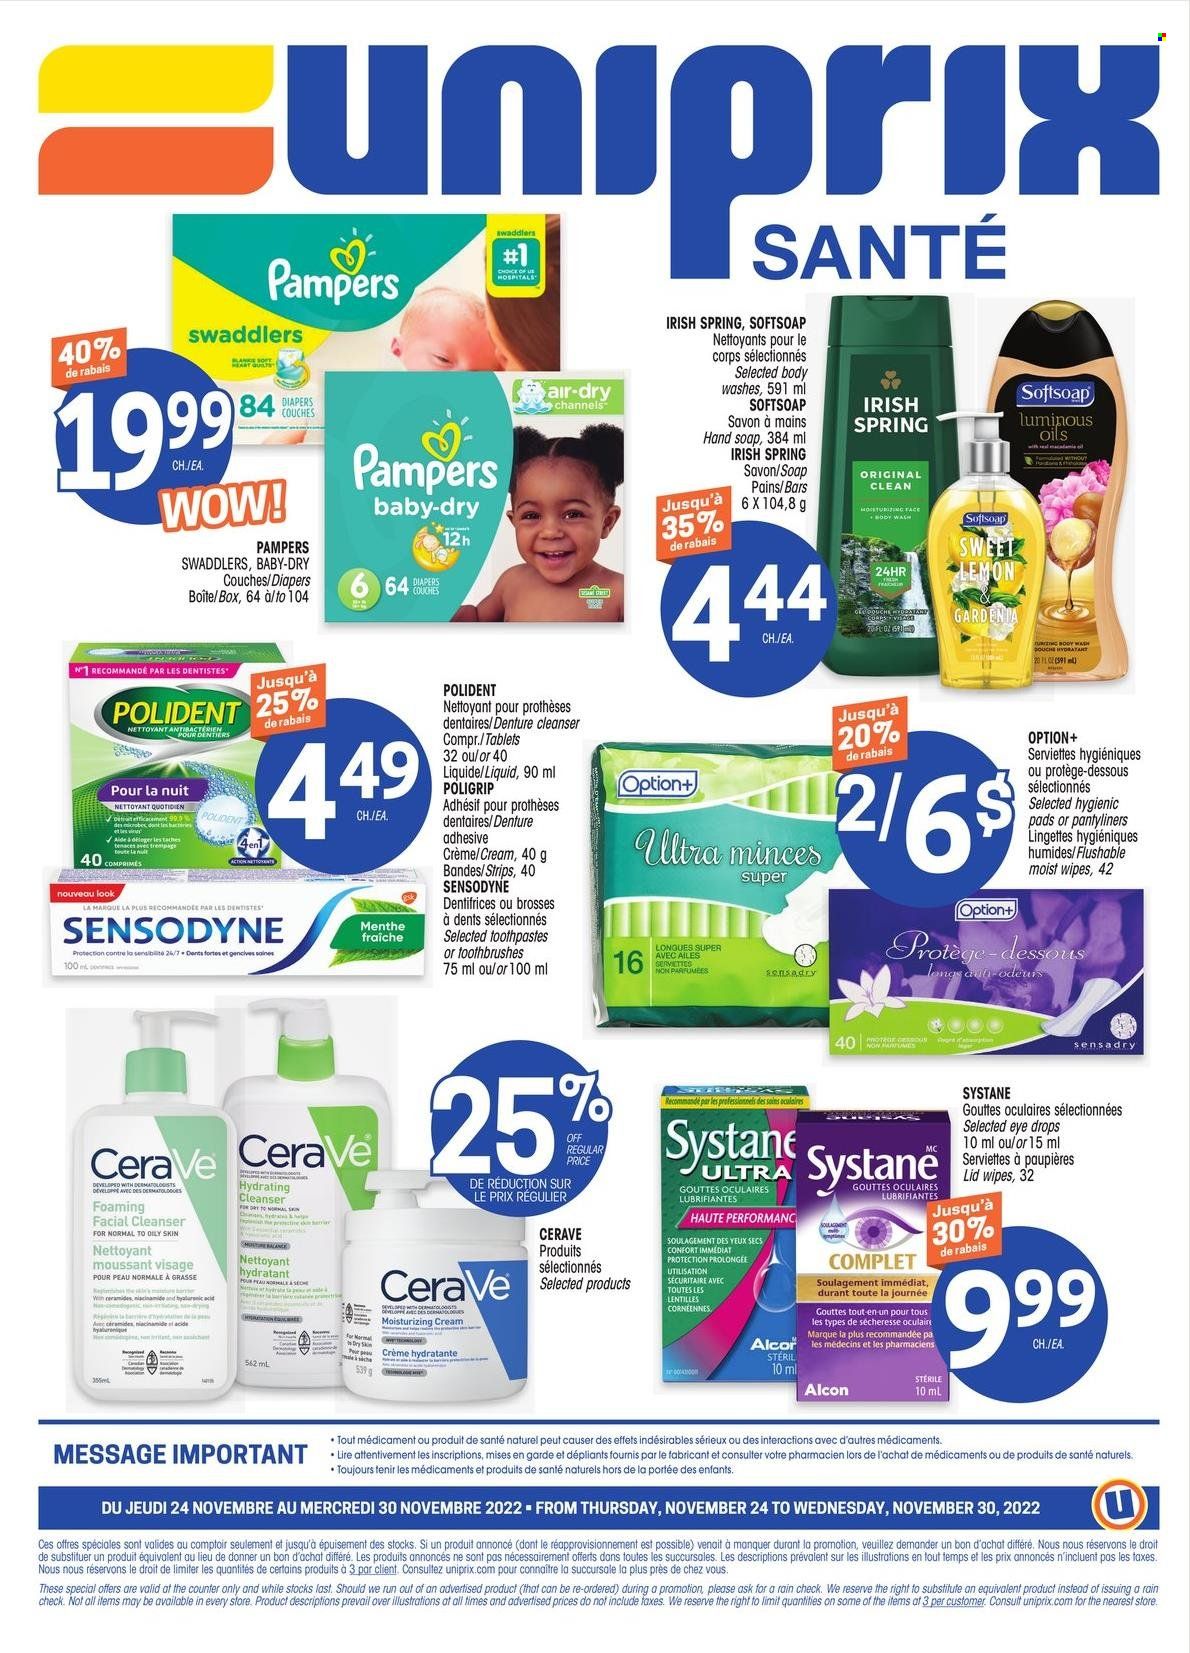 thumbnail - Uniprix Santé Flyer - November 24, 2022 - November 30, 2022 - Sales products - wipes, nappies, Softsoap, hand soap, soap, Polident, pantyliners, CeraVe, cleanser, Niacinamide, eye drops, Systane, Pampers, Sensodyne. Page 4.